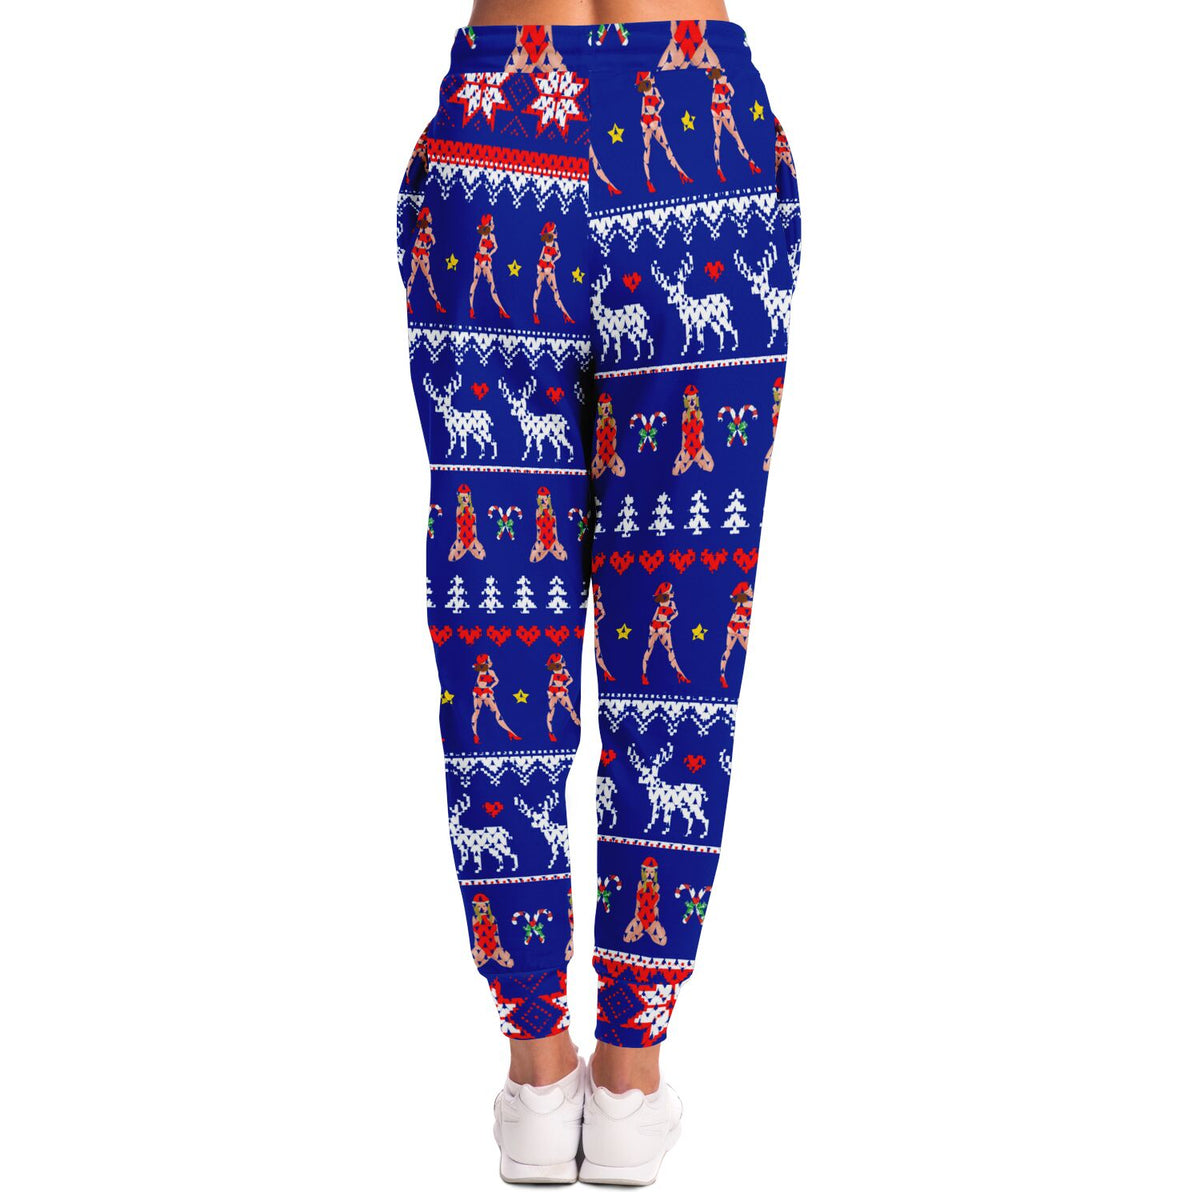 Sleighing These Ho's - Christmas Joggers